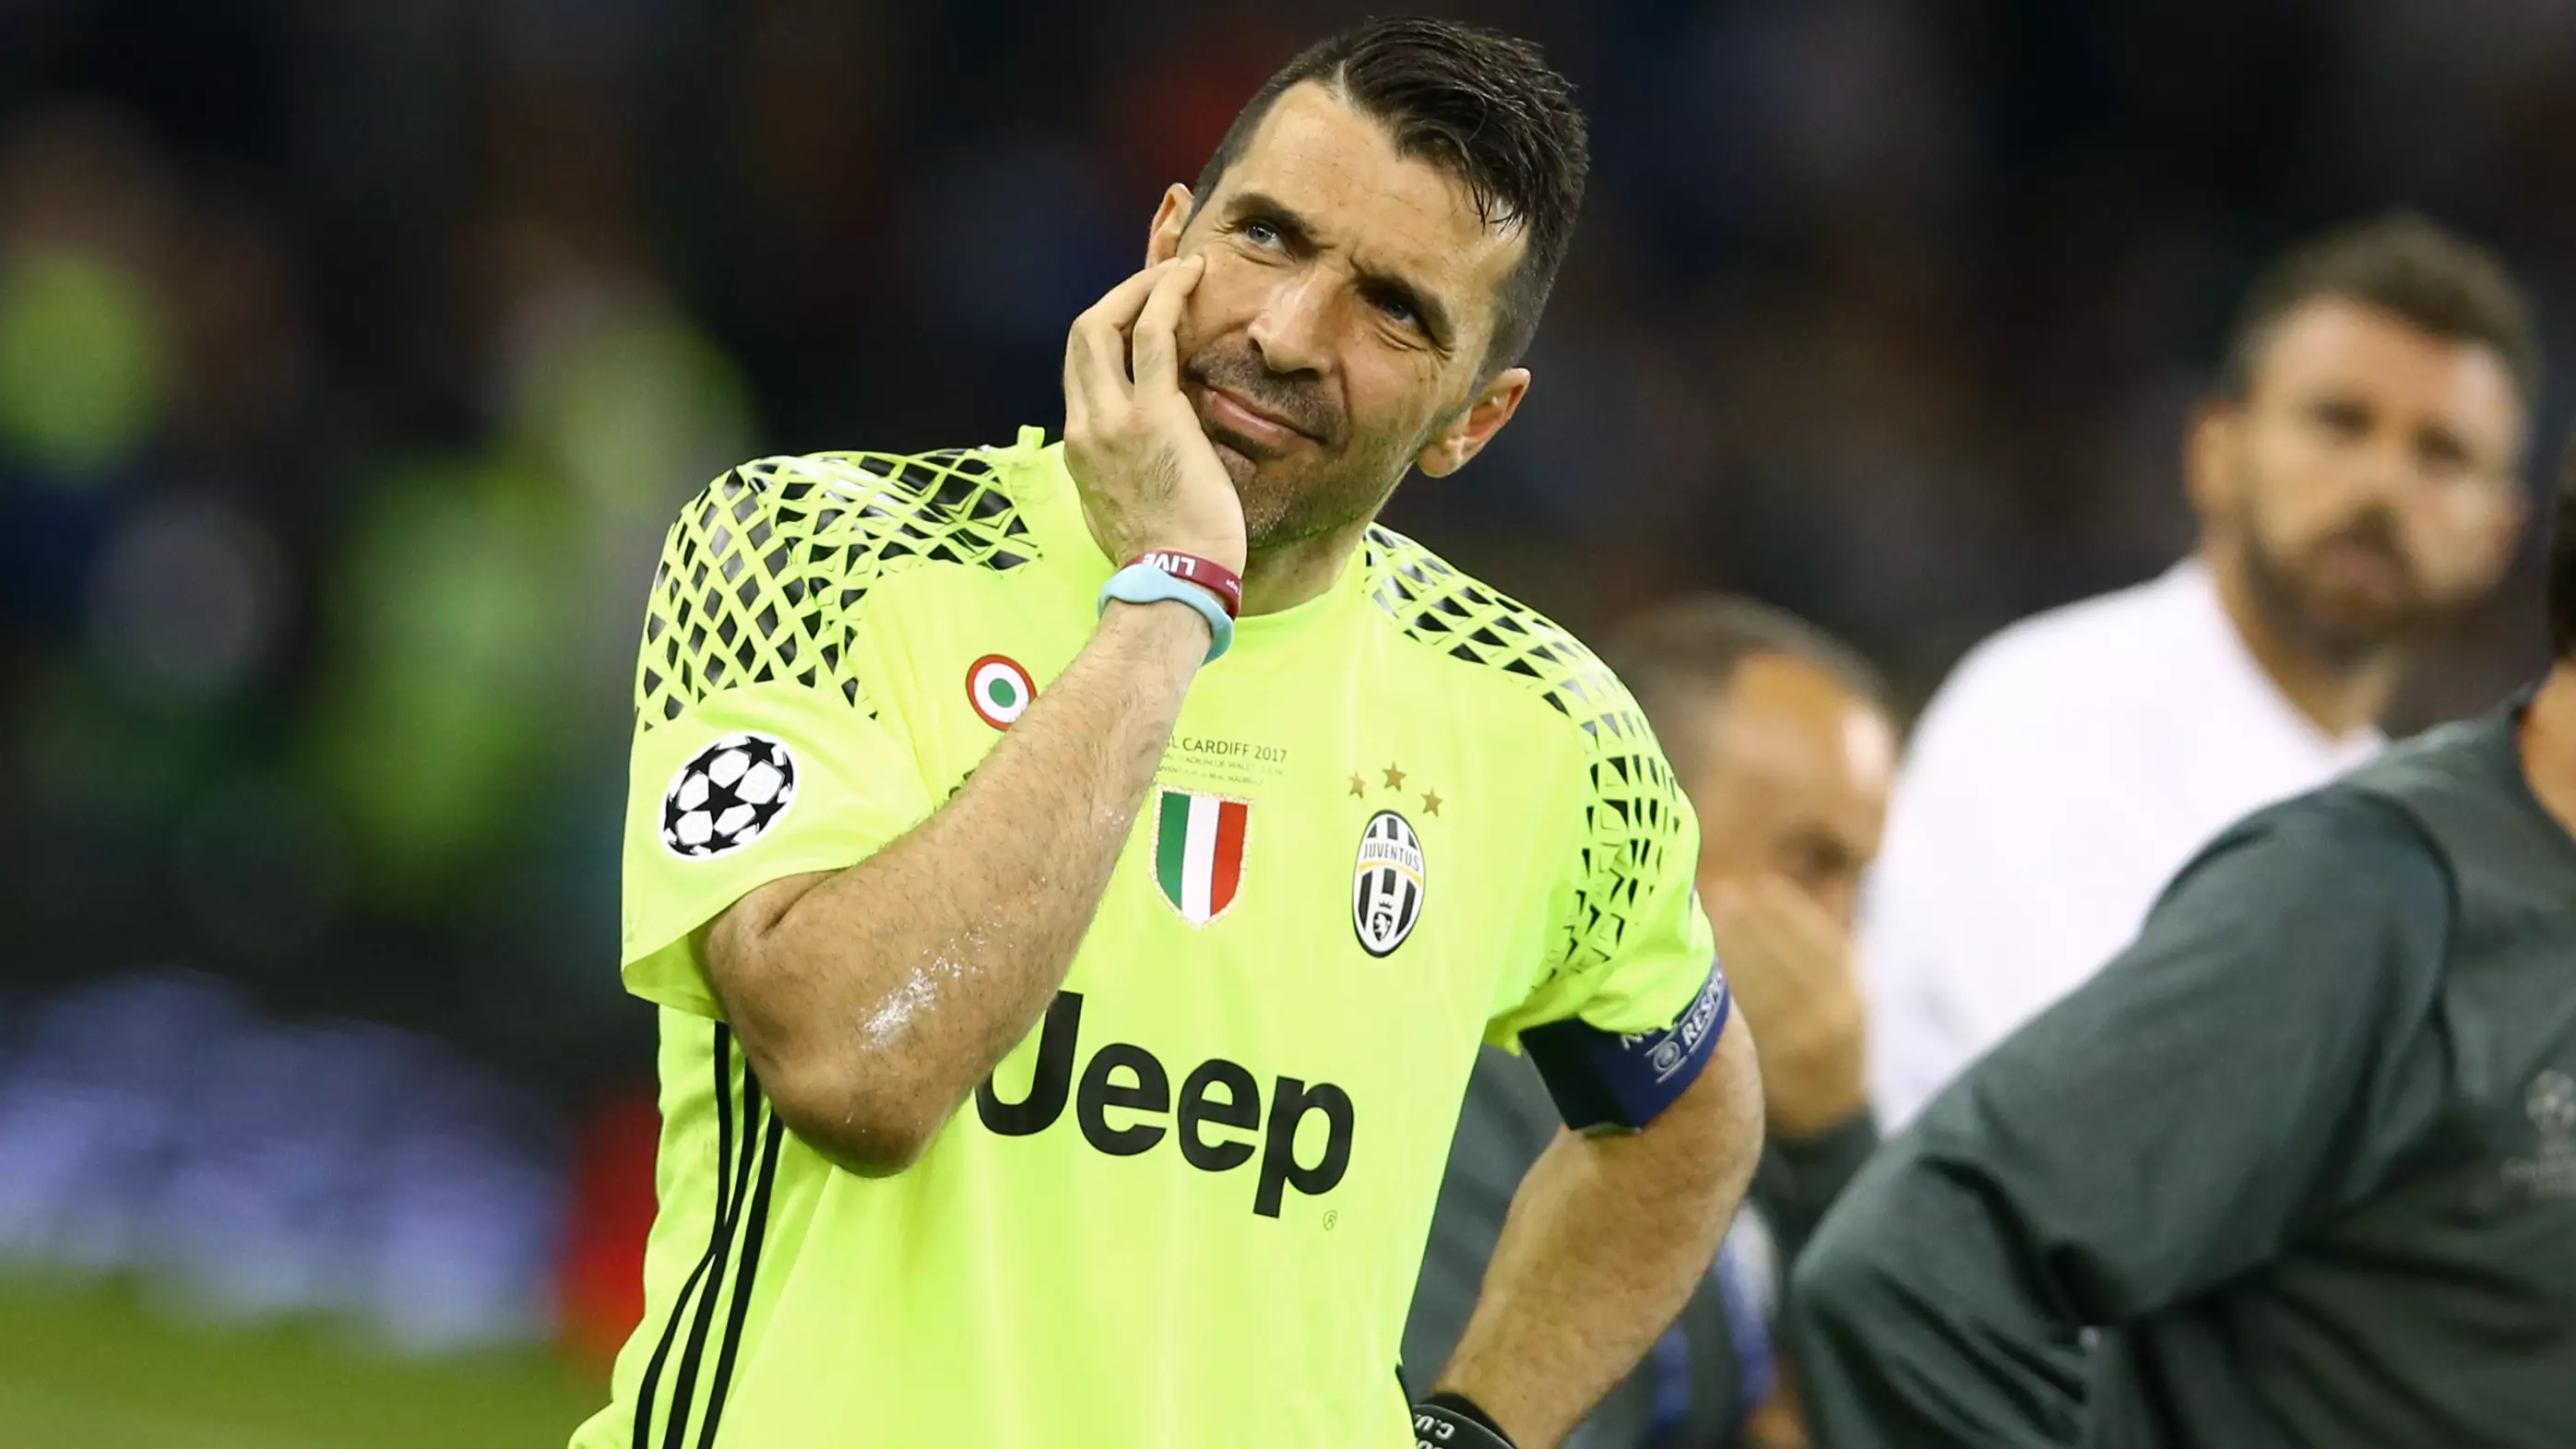 'Flawed' Genius: Missing Out On Holy Grail Doesn't Diminish Gianluigi Buffon